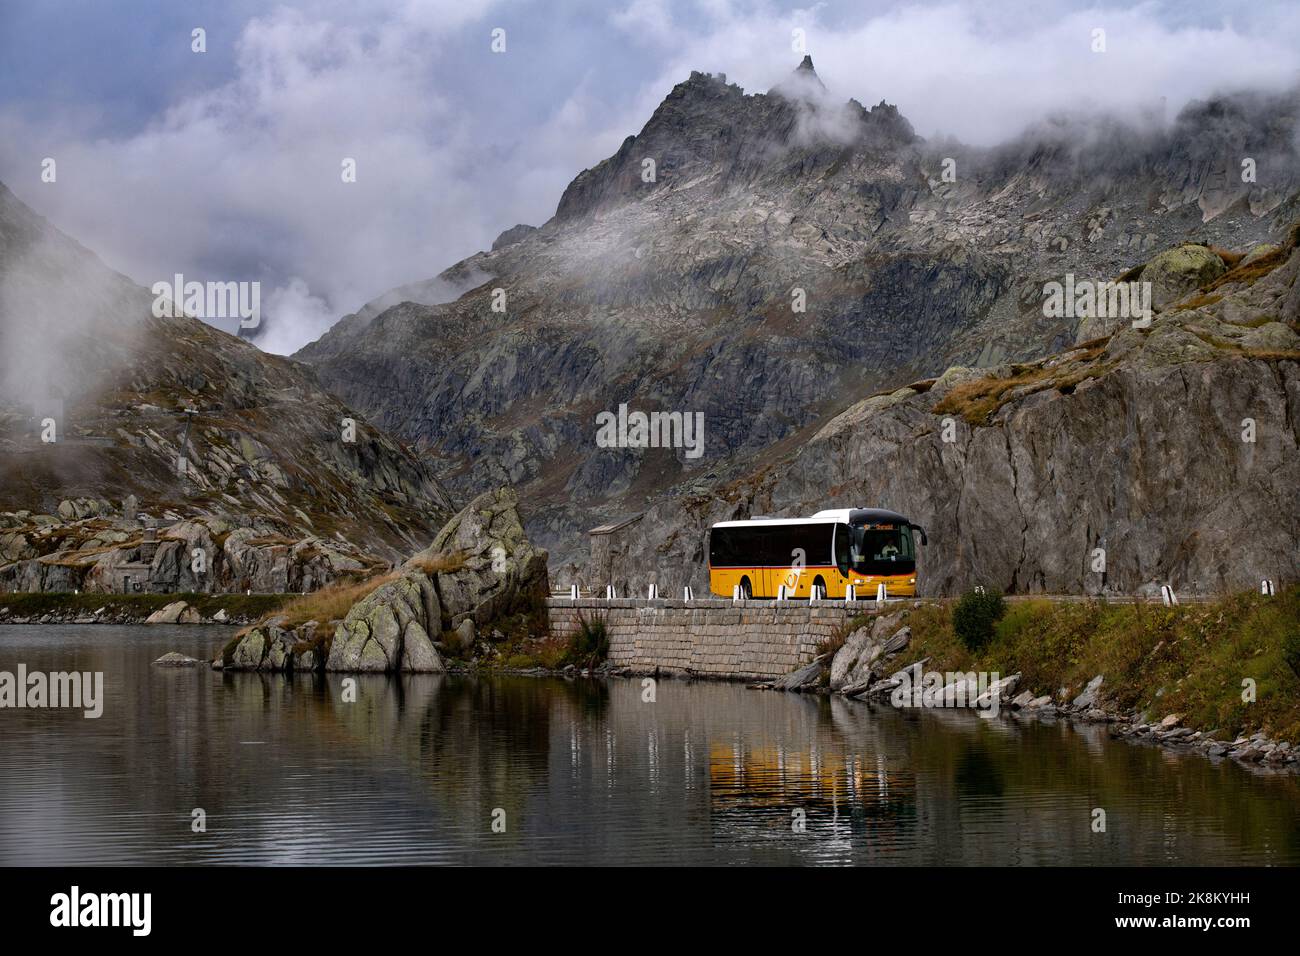 Post Bus at summit of the The Grimsel Pass: Grimselpass; Col du Grimsel;: Passo del Grimsel is a mountain pass in Switzerland, crossing the Bernese Al Stock Photo